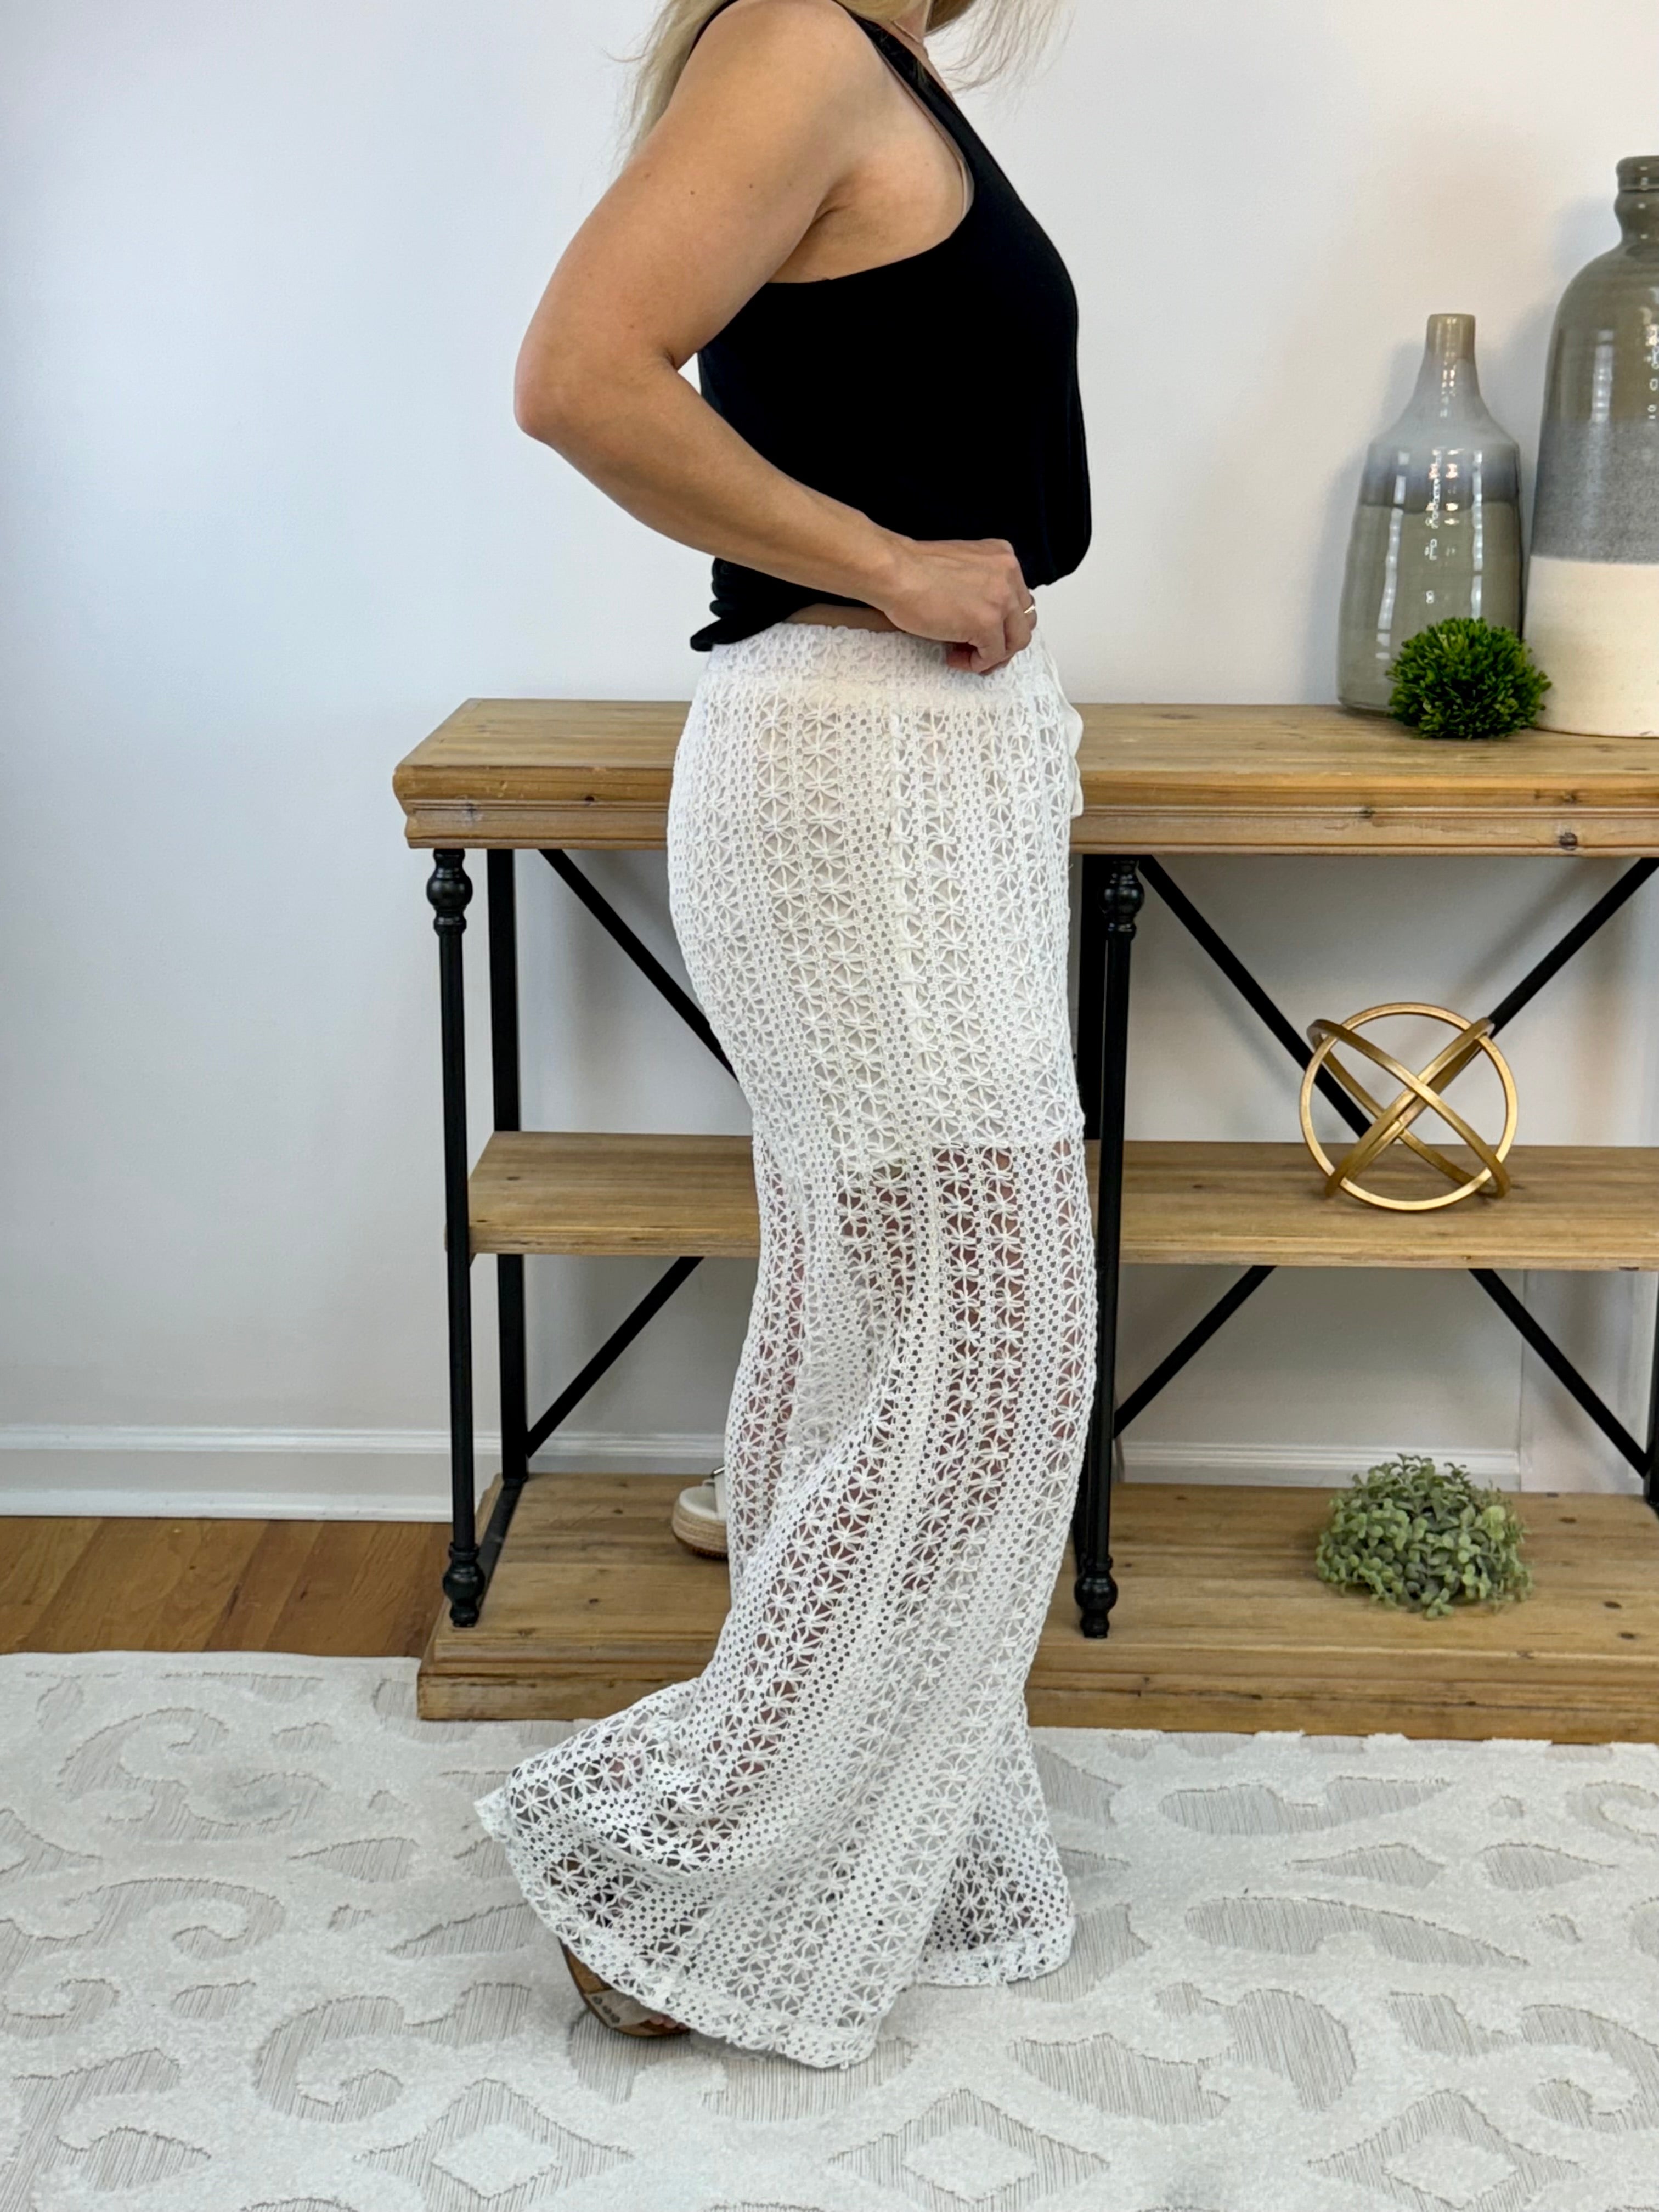 Island Time Crochet Pants - White-240 Pants-The Lovely Closet-The Lovely Closet, Women's Fashion Boutique in Alexandria, KY